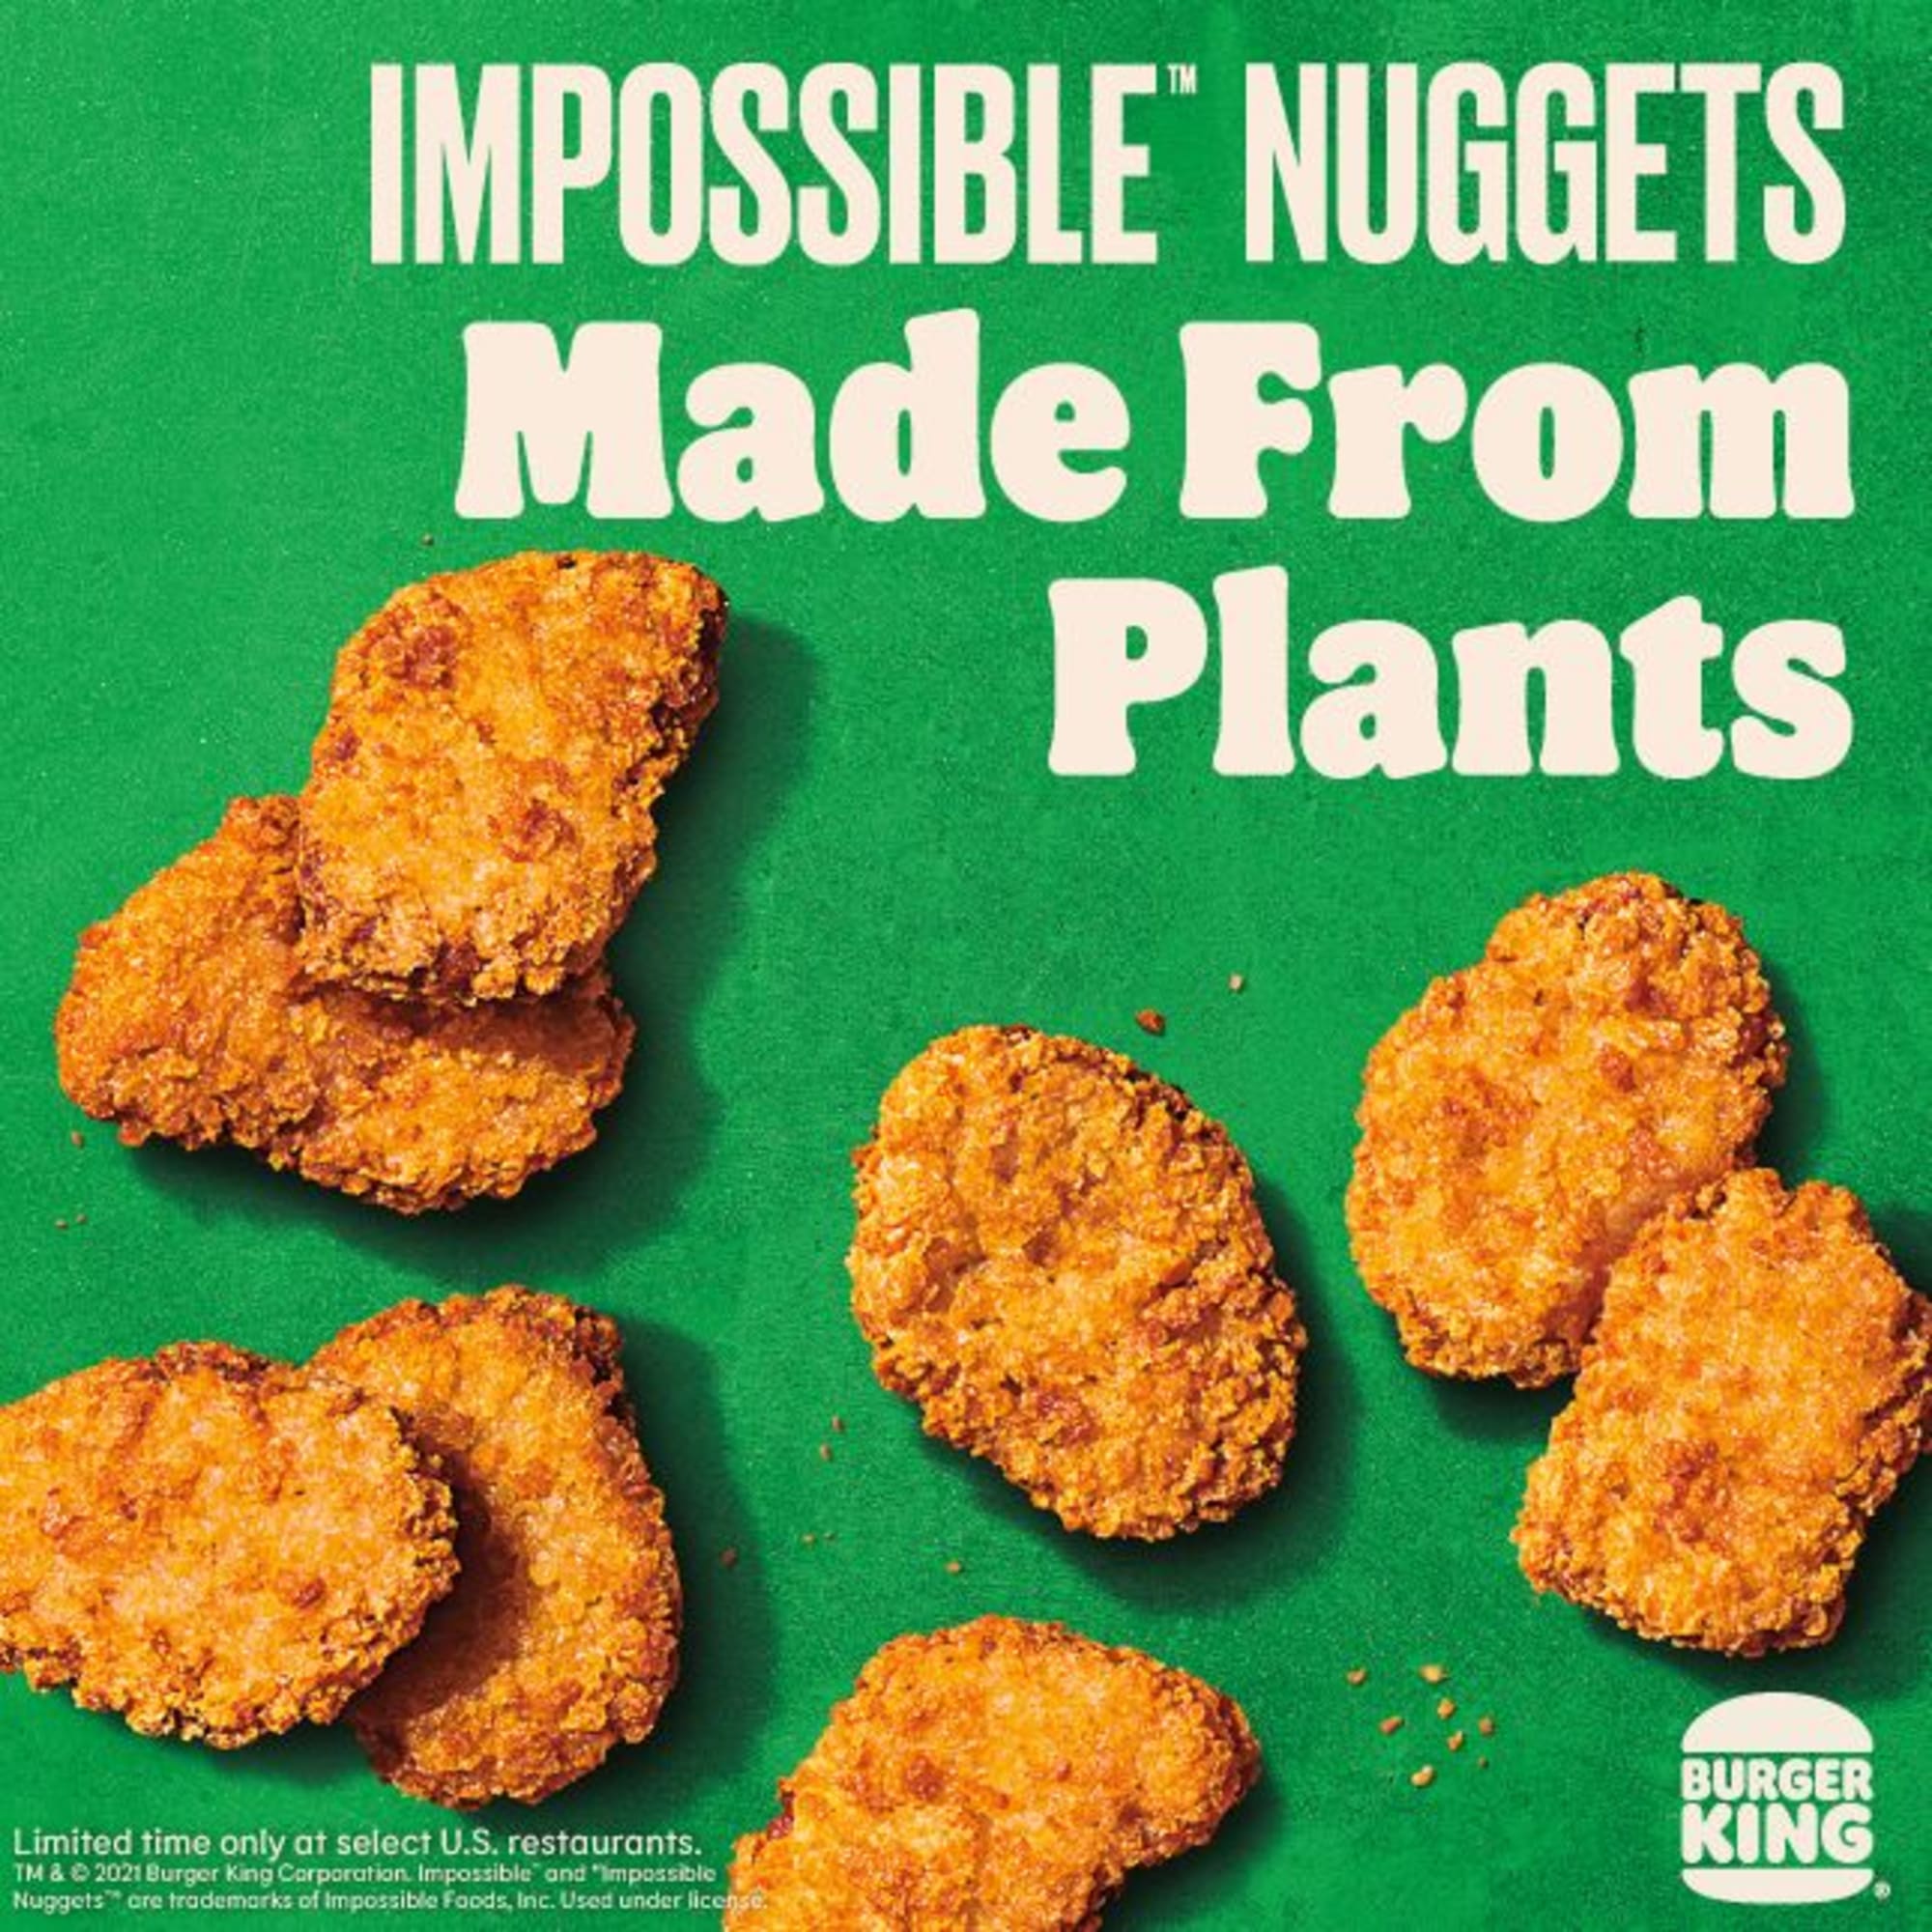 Burger King makes waves with two new chicken nuggets menu additions